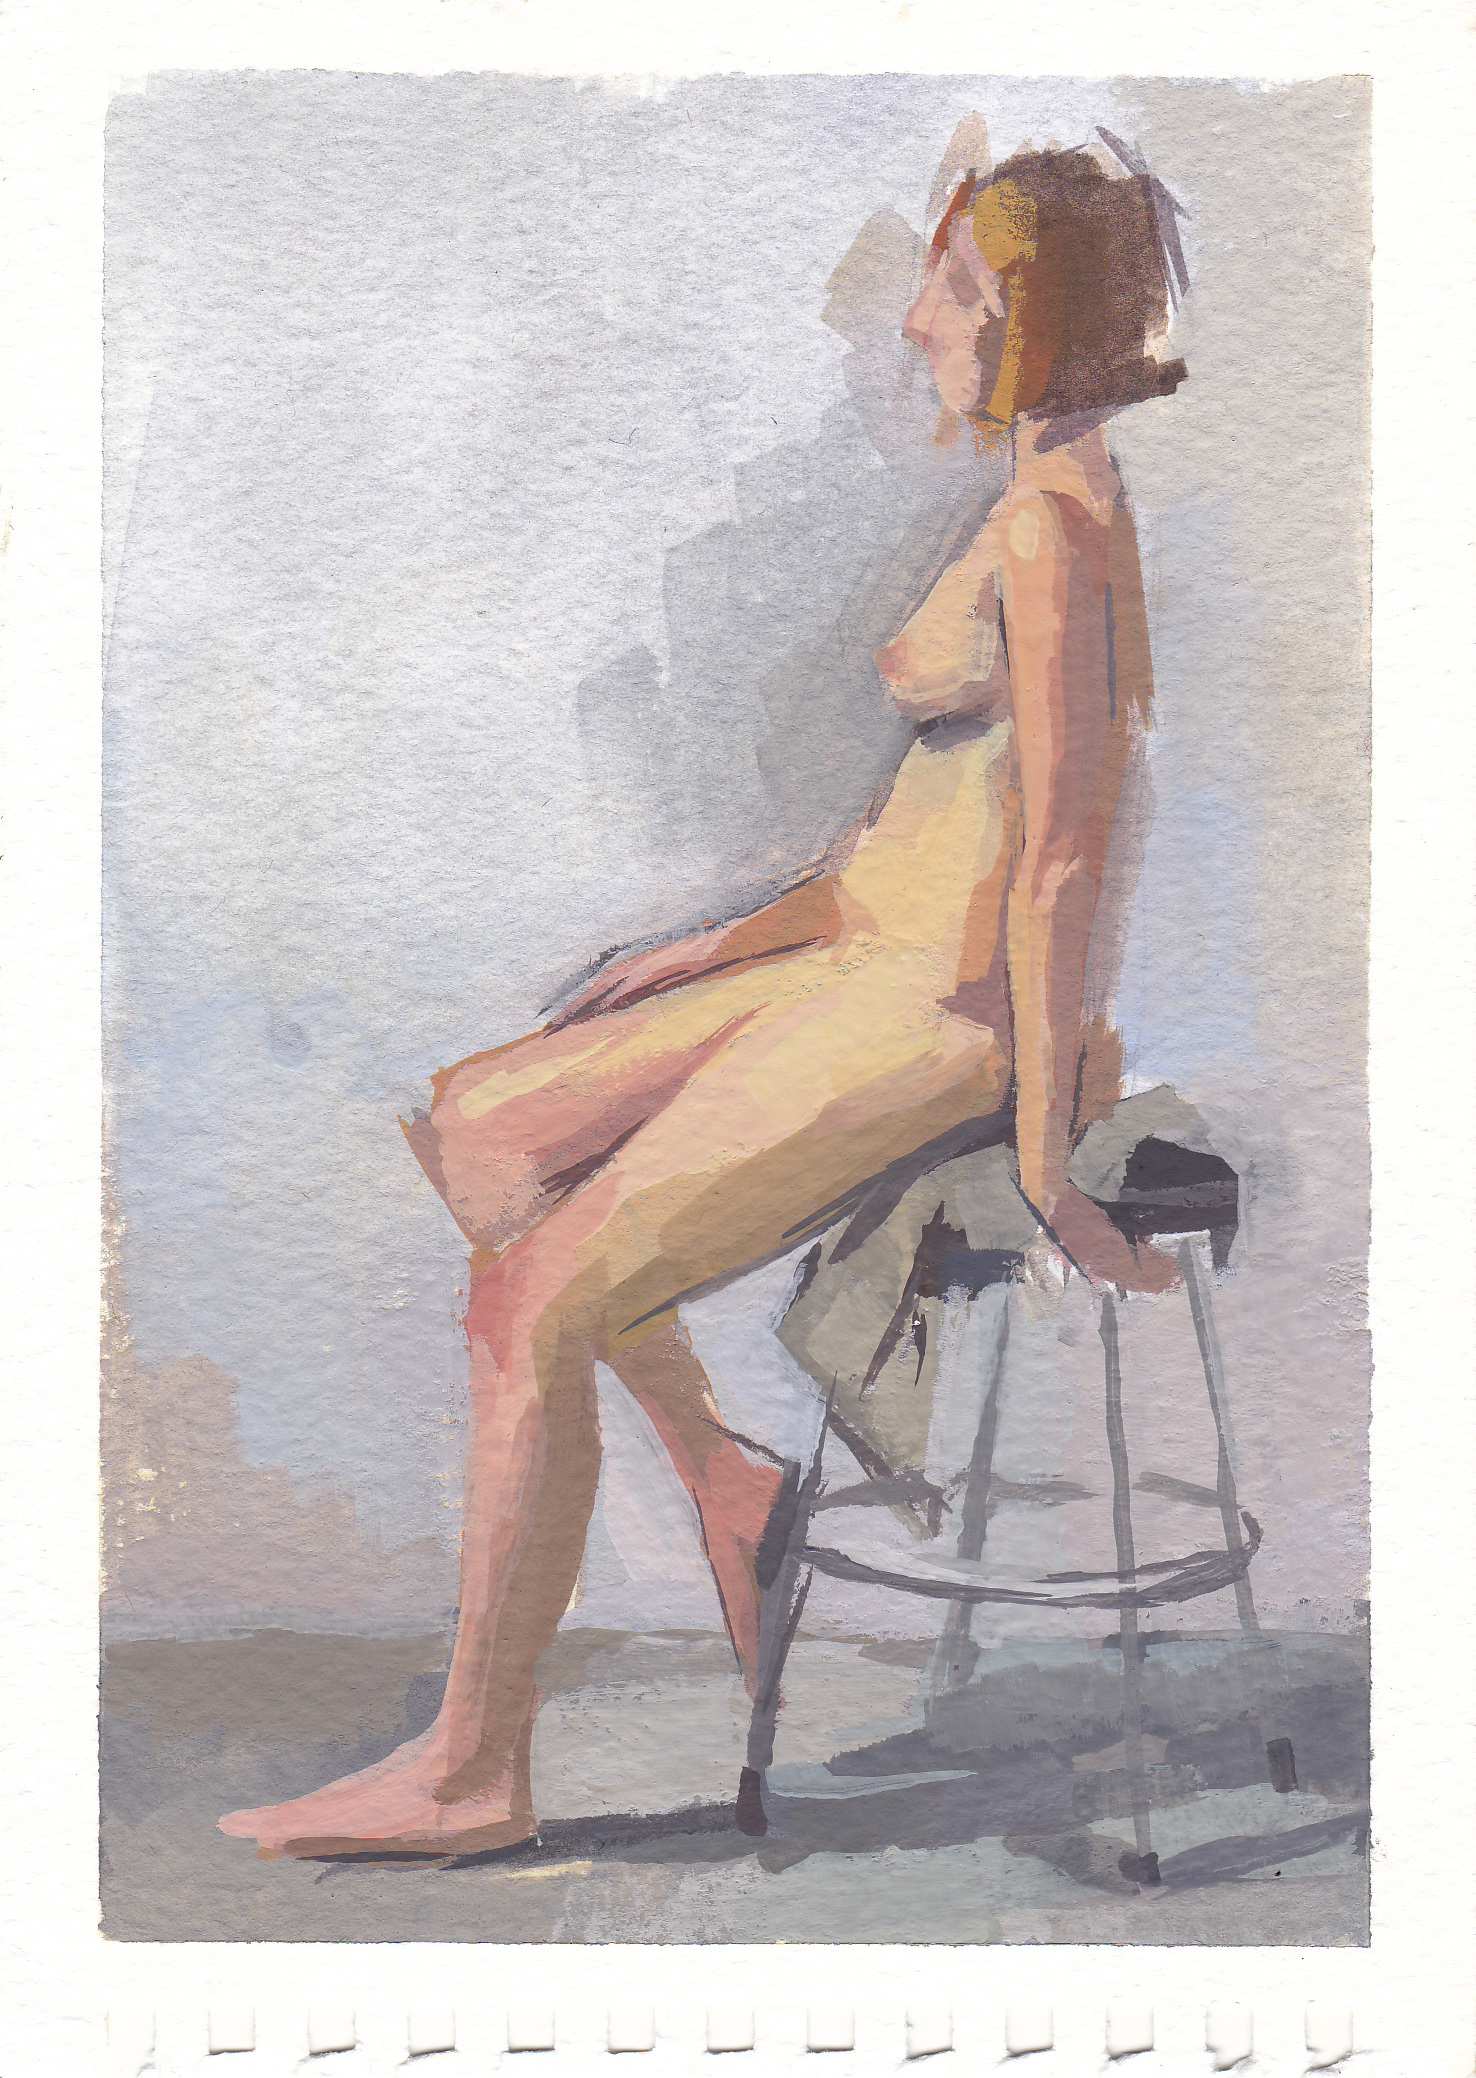    nude figure     watercolor and gouache 4.25x6.25" 2012  private collection San Francisco, CA 